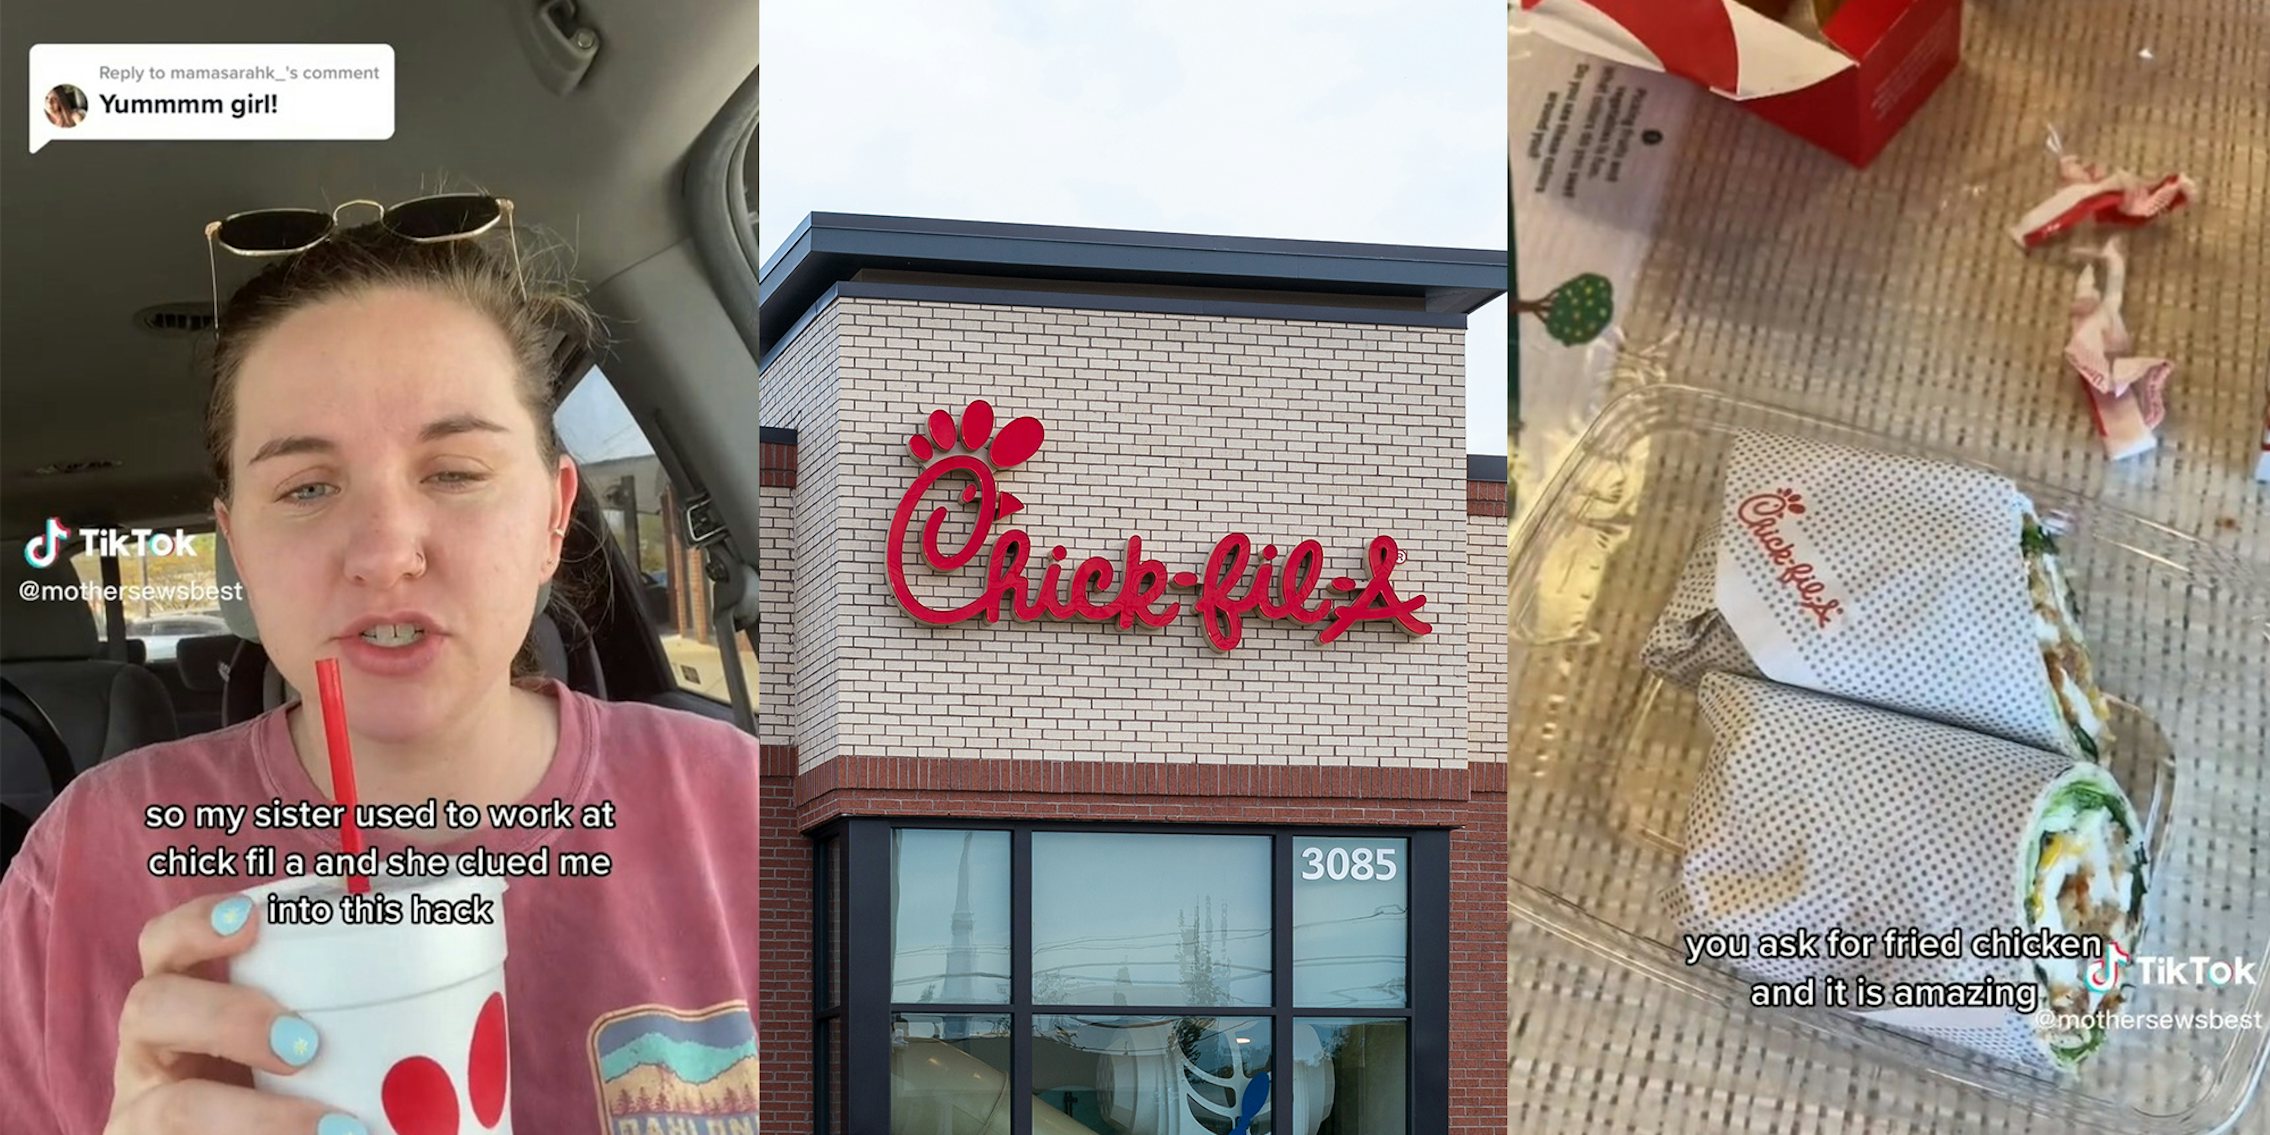 Woman shares hack to get Chick-fil-A fried chicken wrap